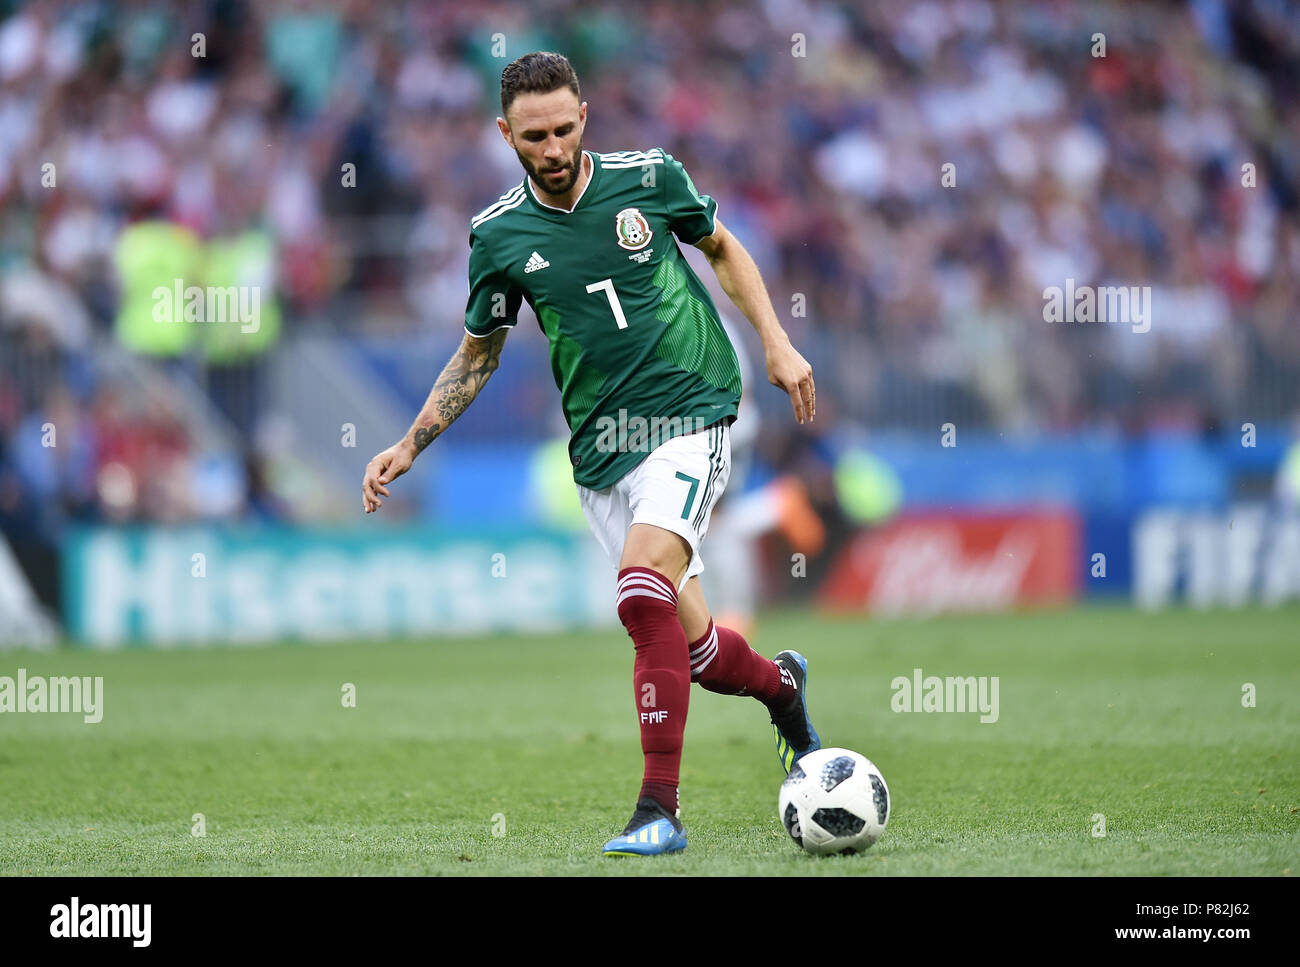 MOSCOW, RUSSIA - JUNE 17: Miguel Layun of Mexico in action during the 2018 FIFA World Cup Russia group F match between Germany and Mexico at Luzhniki Stadium on June 17, 2018 in Moscow, Russia. (Photo by Lukasz Laskowski/PressFocus/MB Media) Stock Photo